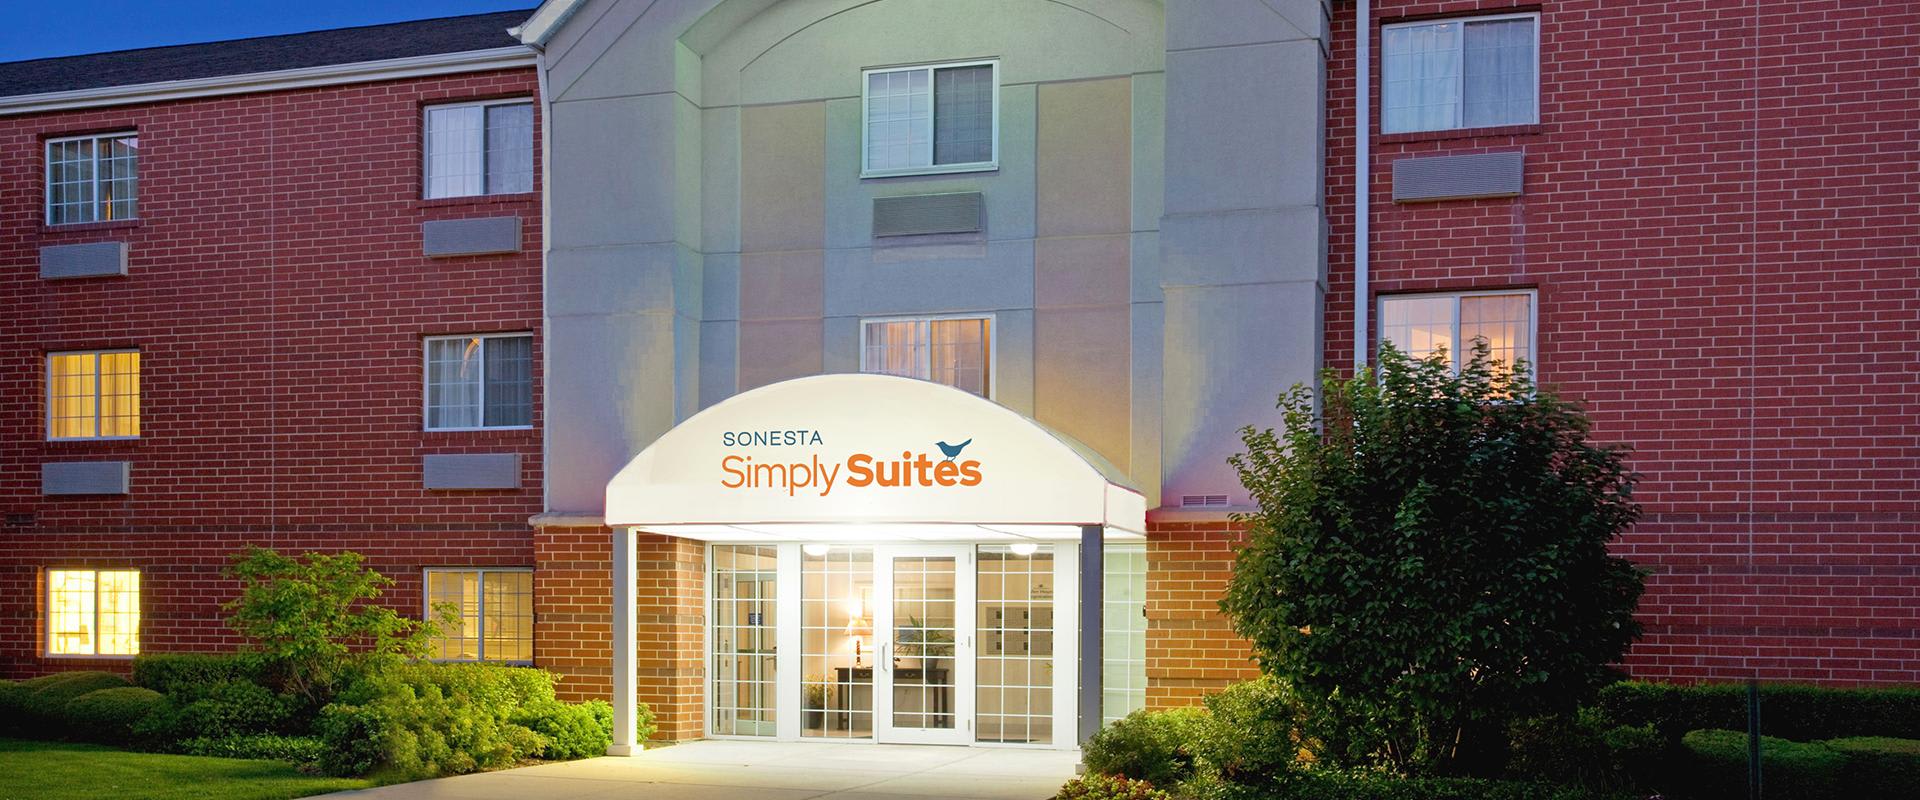 Simply Suites Chicago Naperville Hotel Exterior Entrance